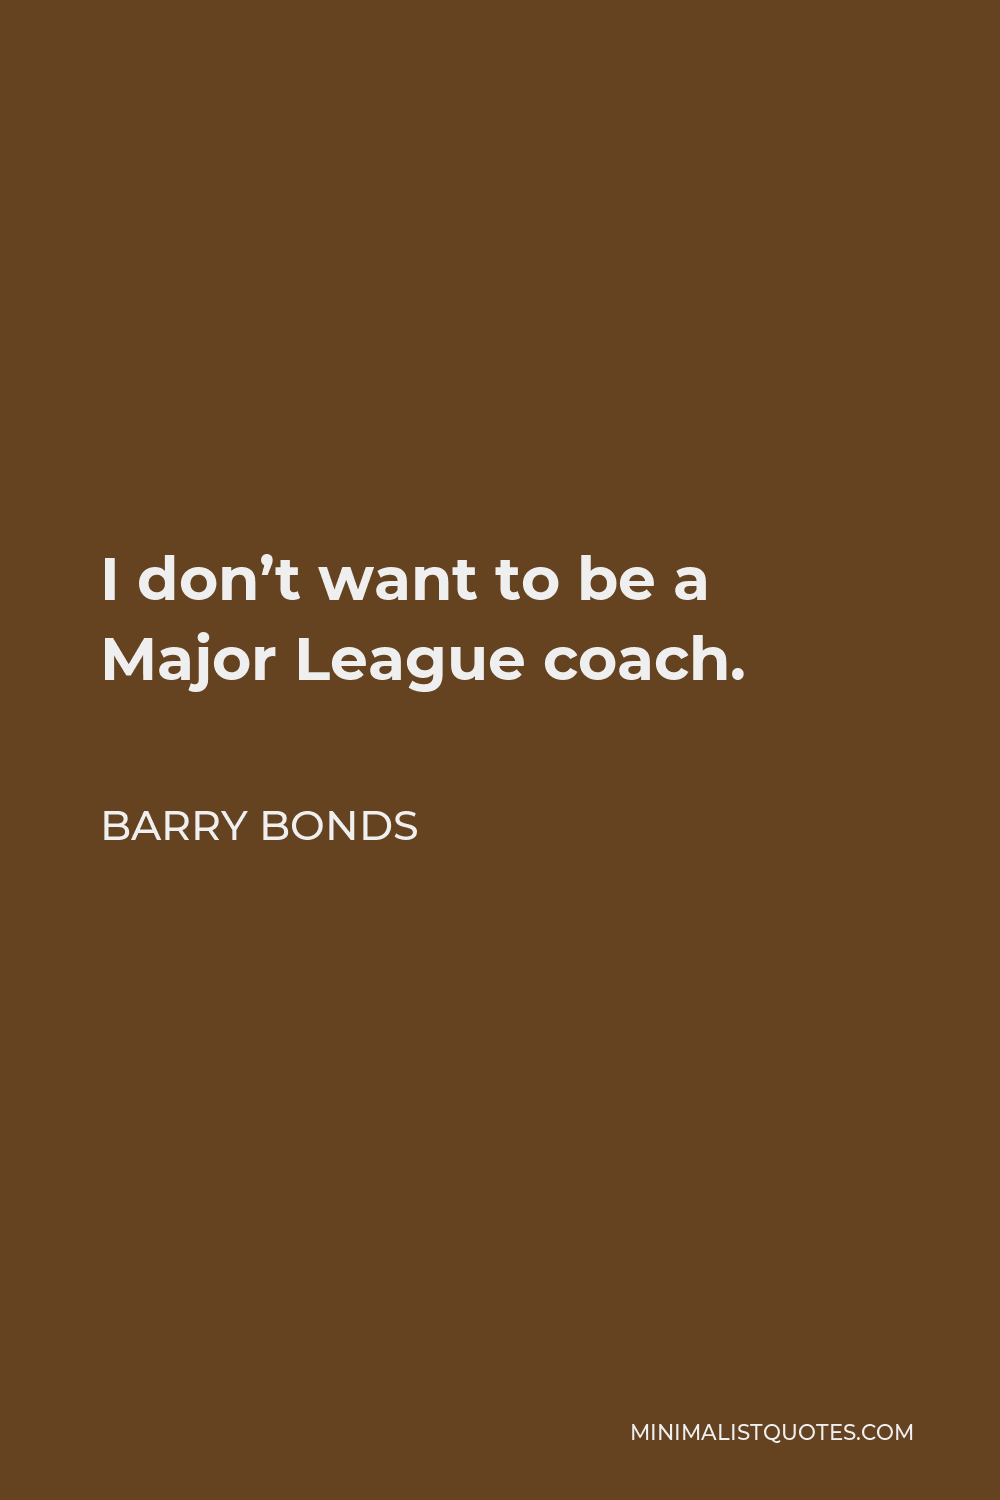 Barry Bonds Quote - I don’t want to be a Major League coach.